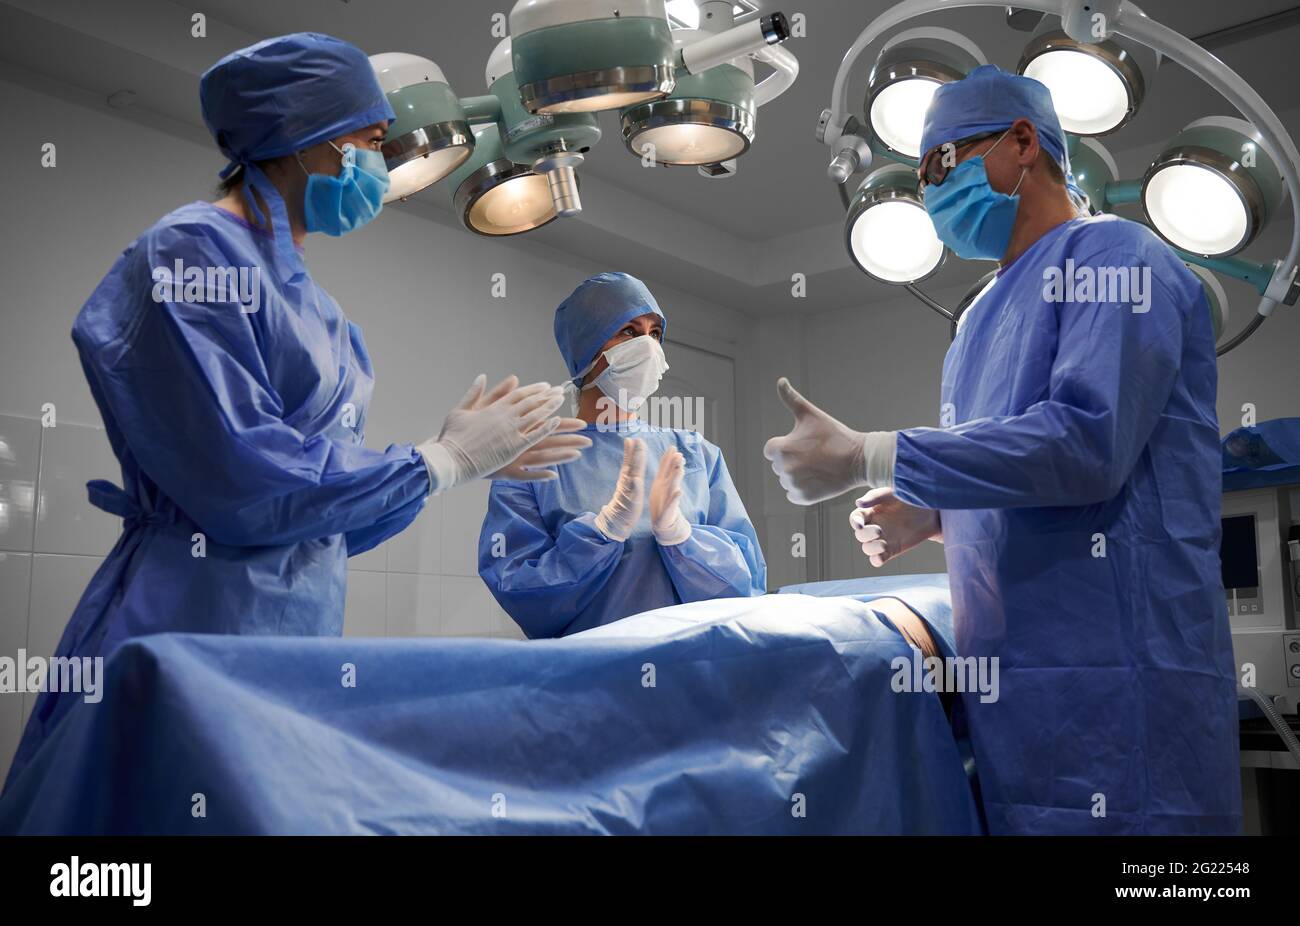 Doctors standing by patient after surgical operation. Surgeon doing thumbs up gesture while female assistants looking at man and applauding. Concept of medicine, plastic surgery, successful teamwork. Stock Photo